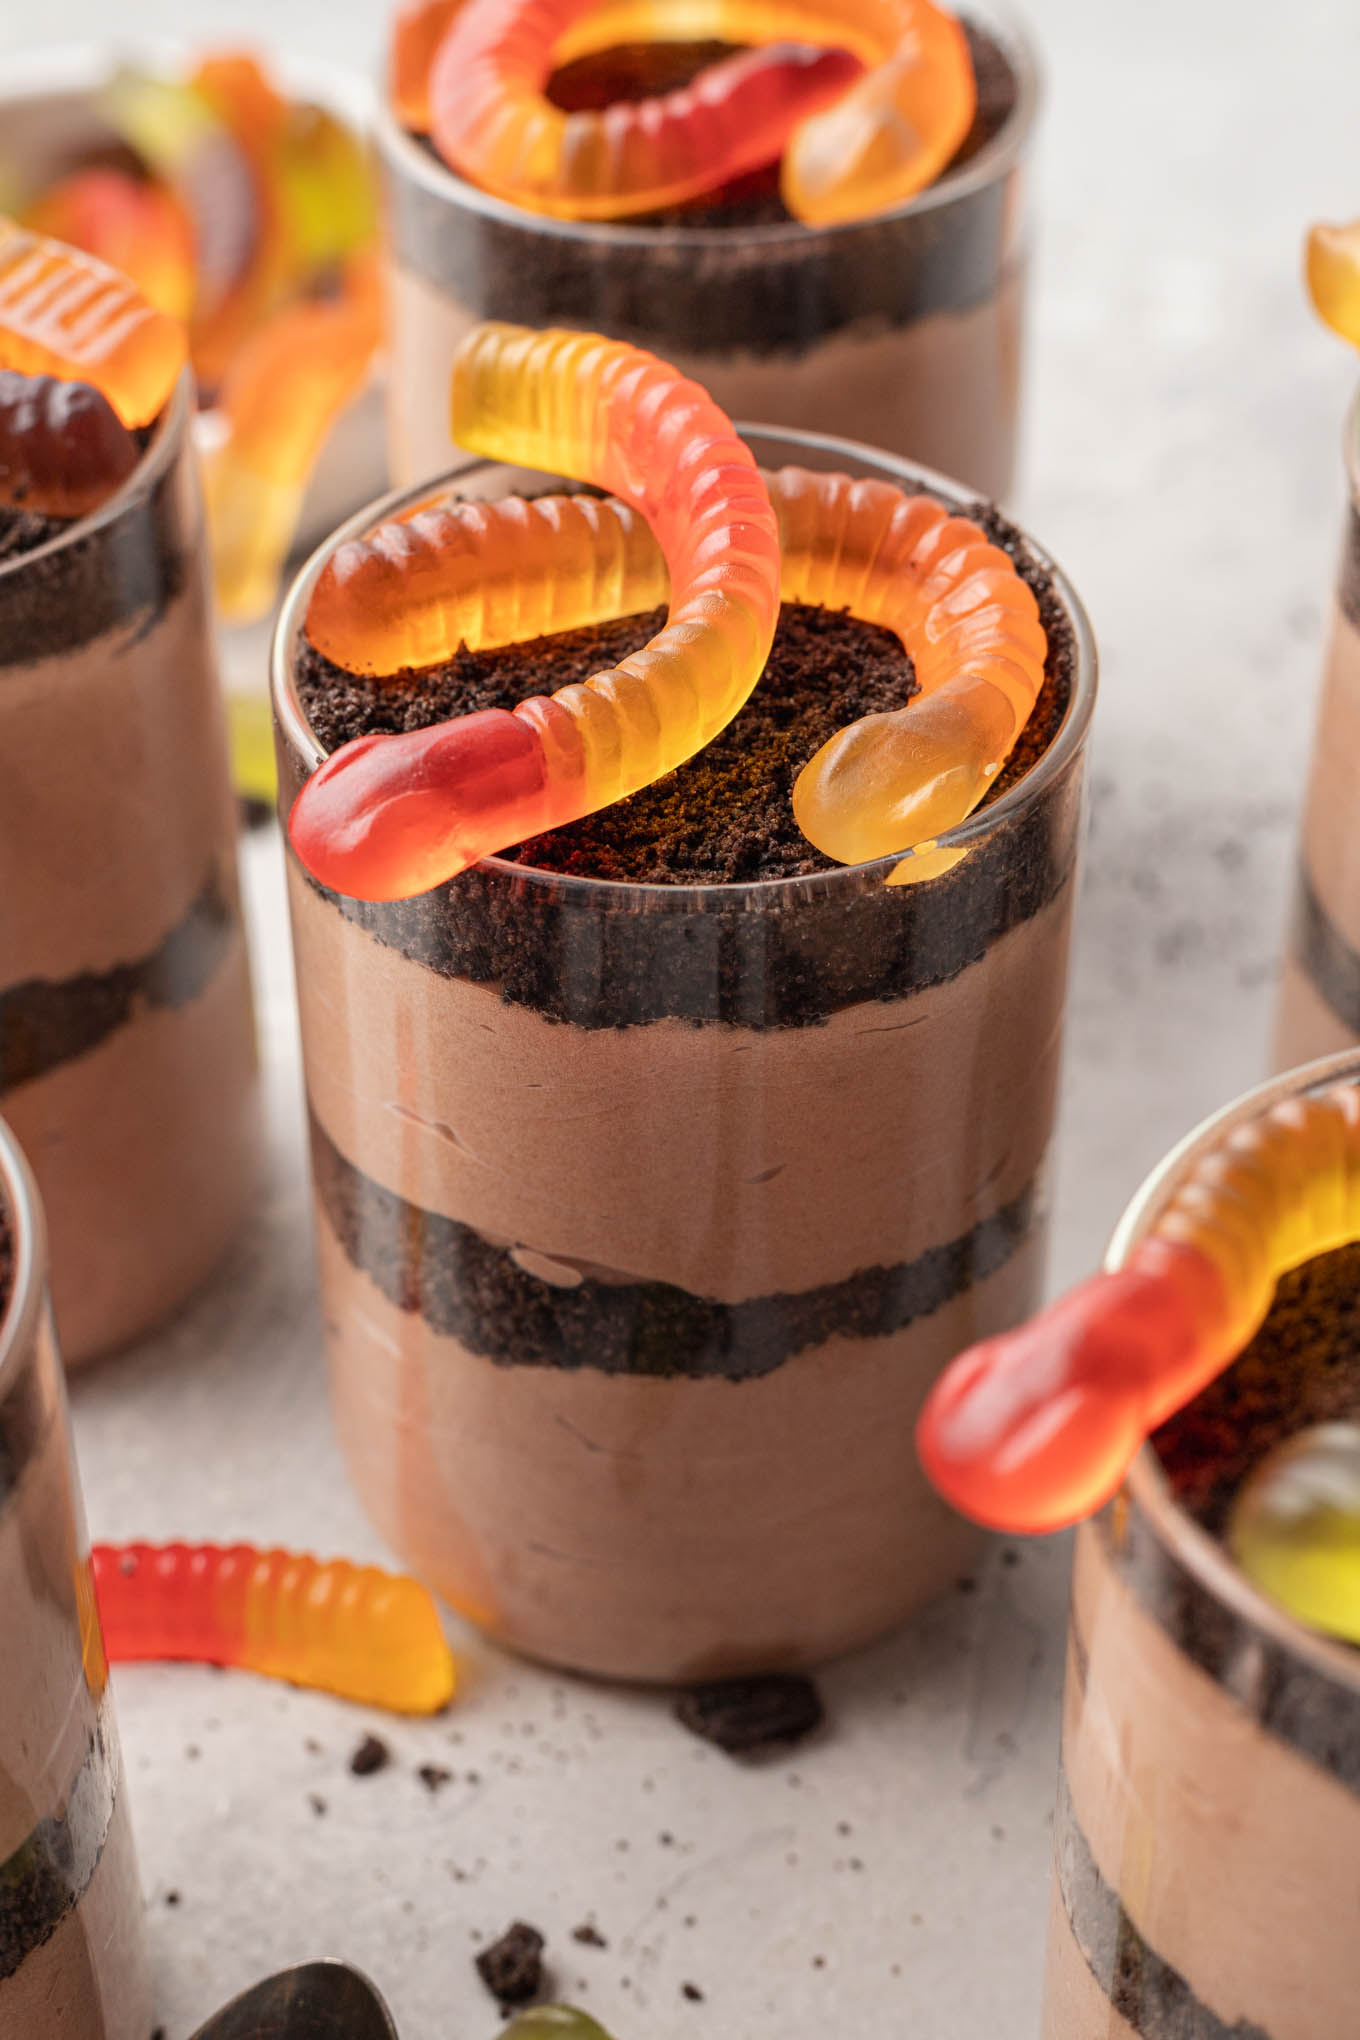 Dirt cups topped with gummy worms.